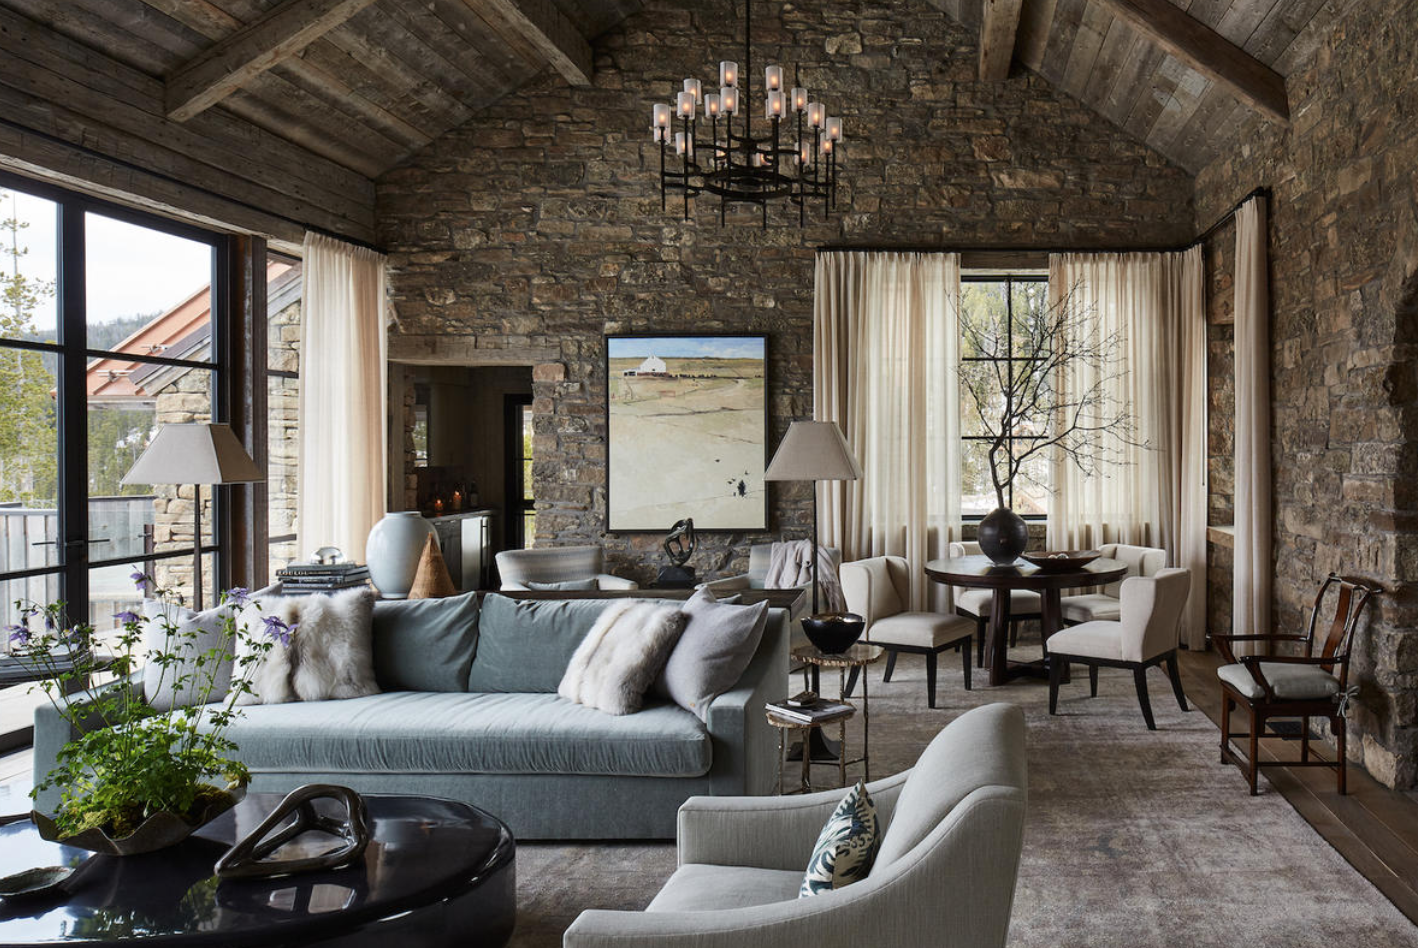 WRJ Design brings sophisticated alpine elegance to interiors, combining contemporary European furnishings with rustic elements, lush textures, one-of-a-kind items and art (PC: William Abranowicz).